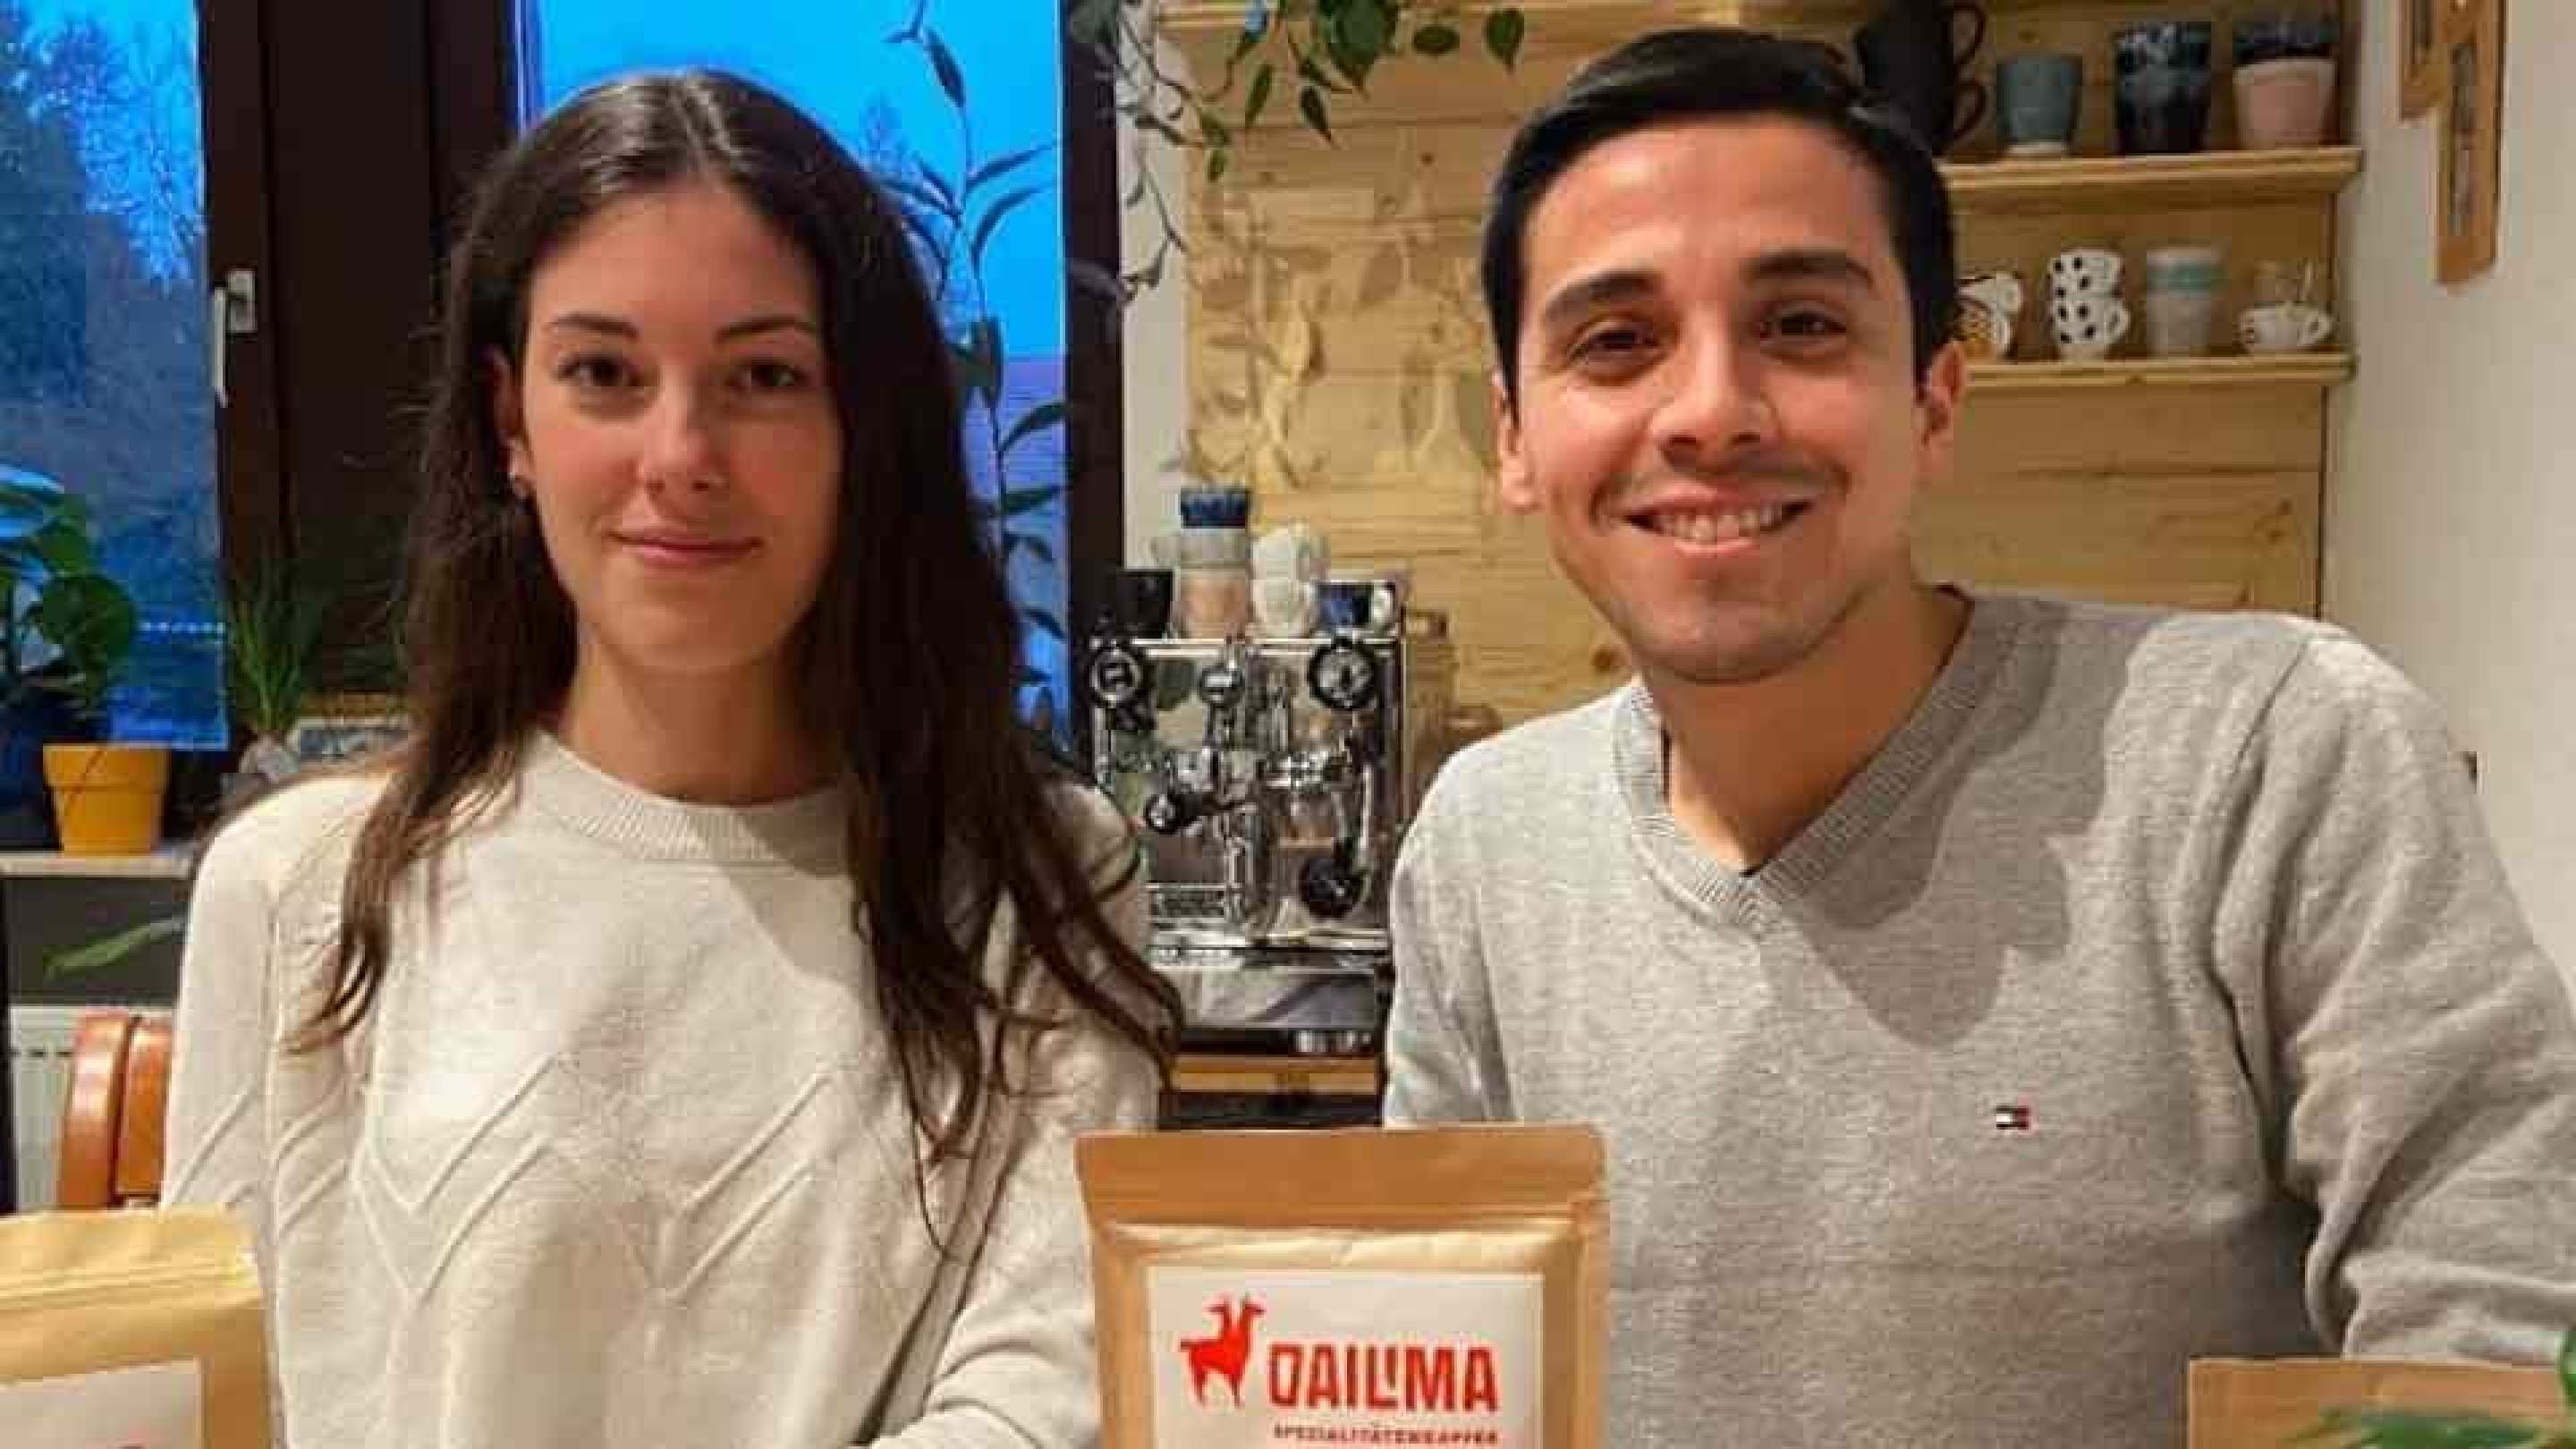 Straight from Peru: ISM student brings fair specialty coffee to Germany